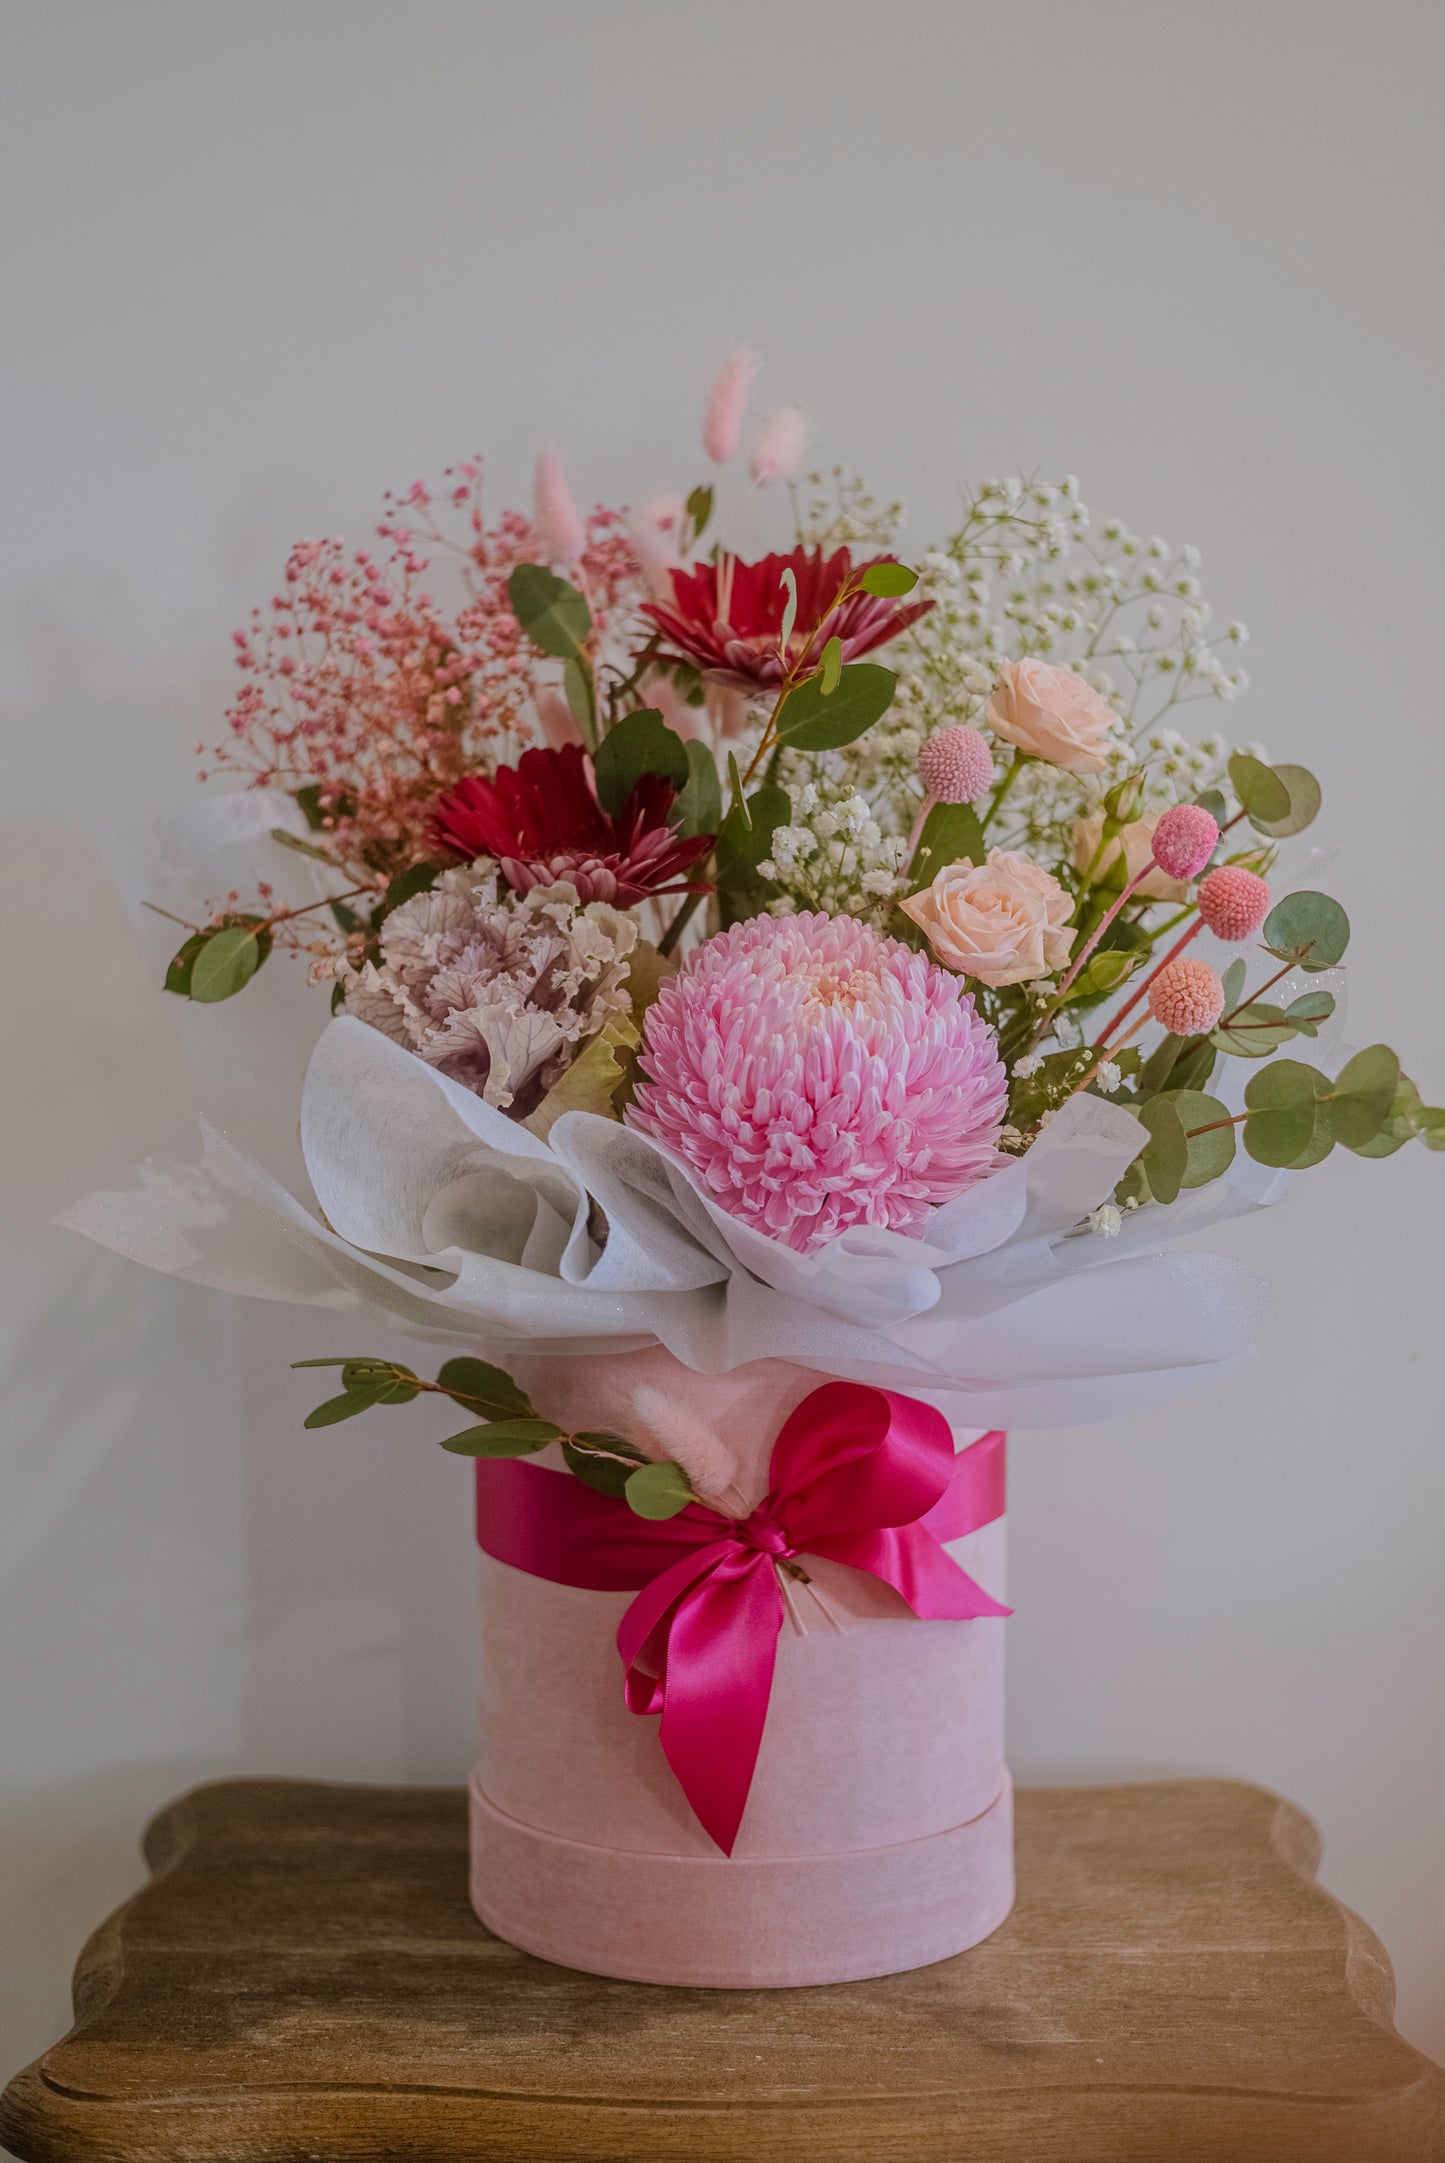 A pastel pink hatbox containing pink flowers